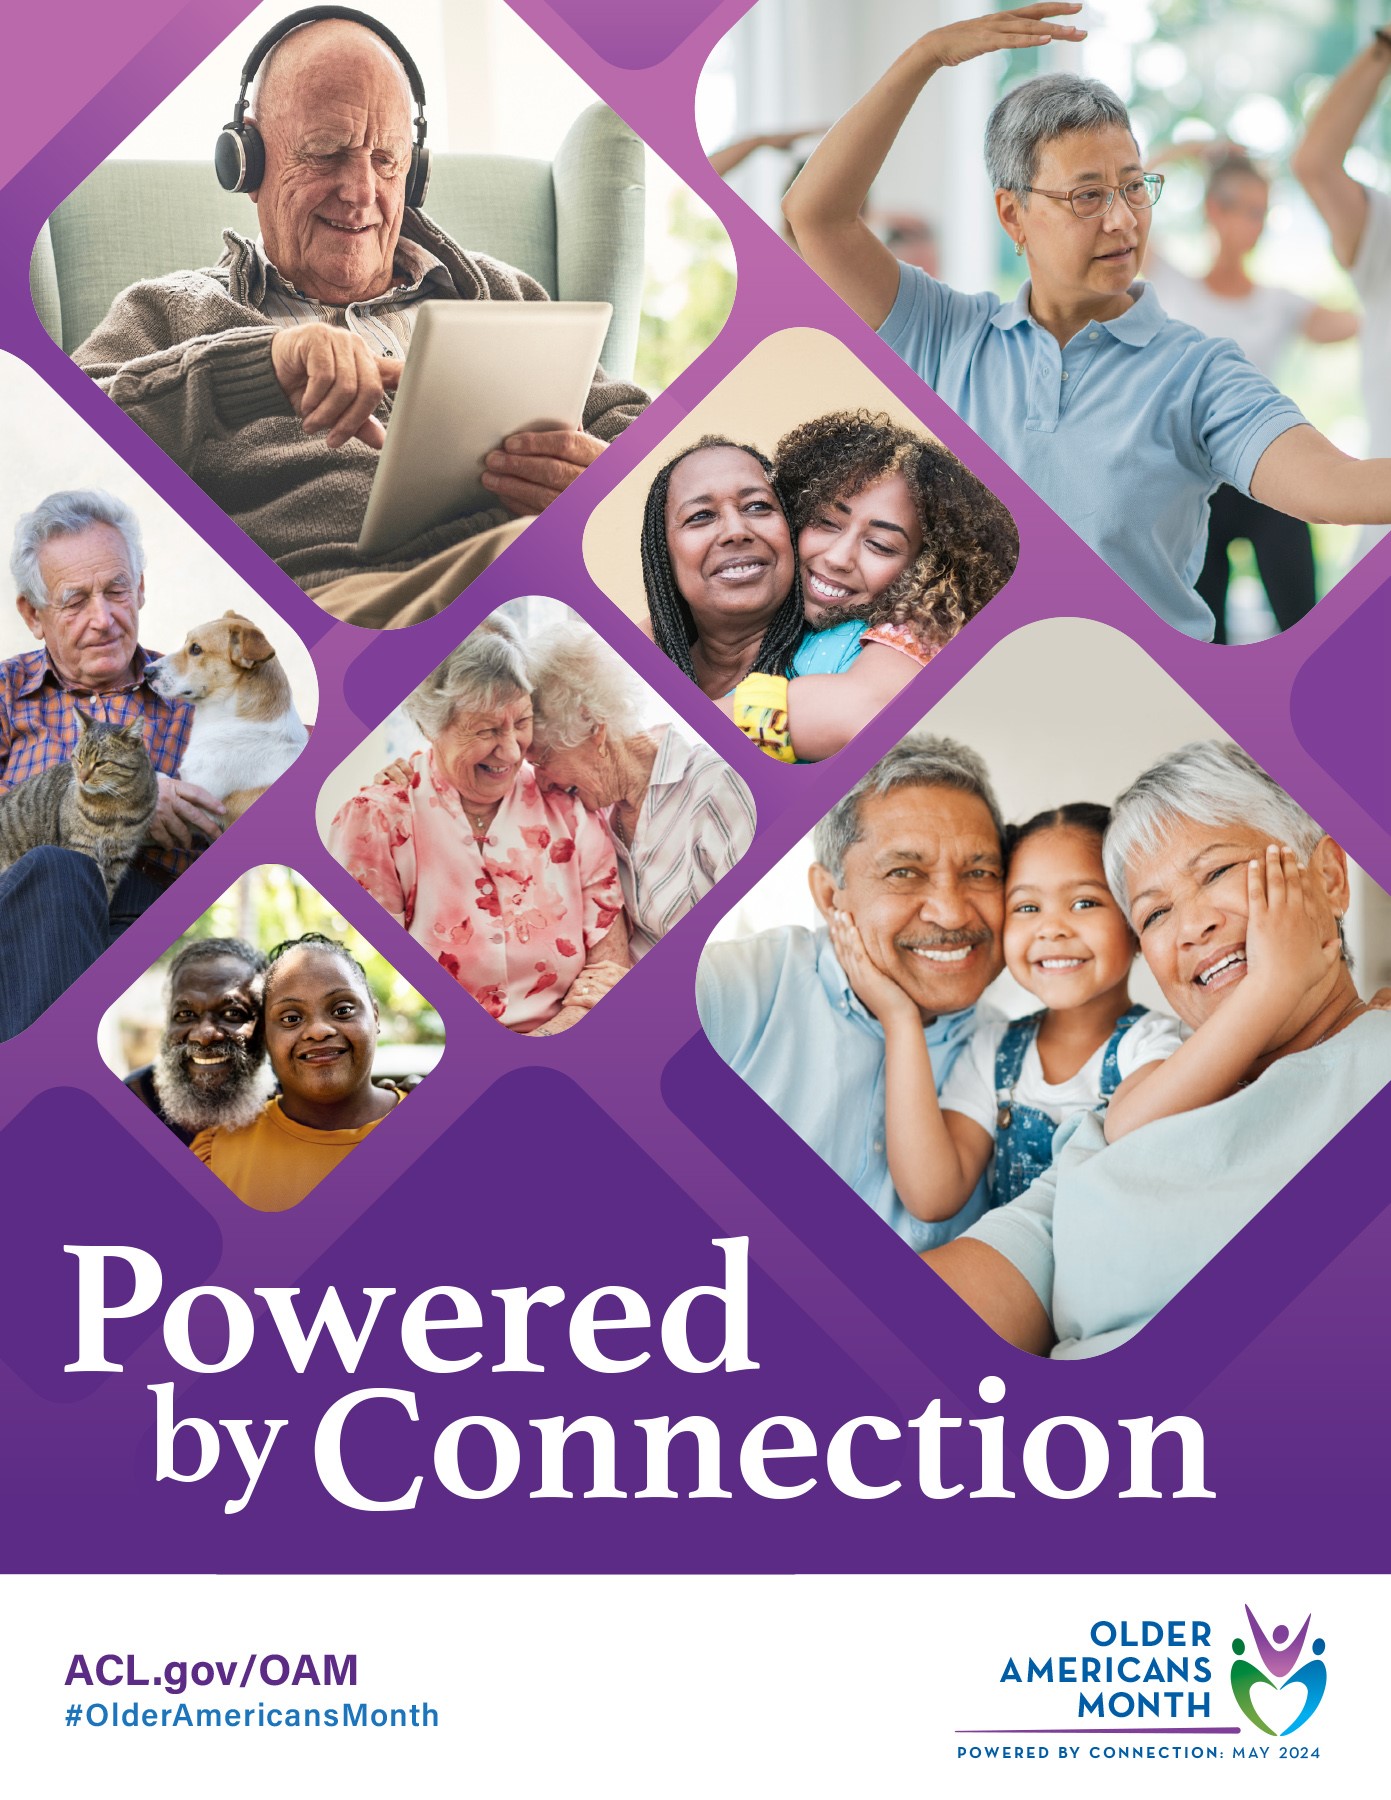 OAM Poster with purple background and photos of older adults participating in various connections - embracing, with grandkids, with pets, with friends. It reads, Powered by Connection and includes the OAM logo, URL, and hashtag